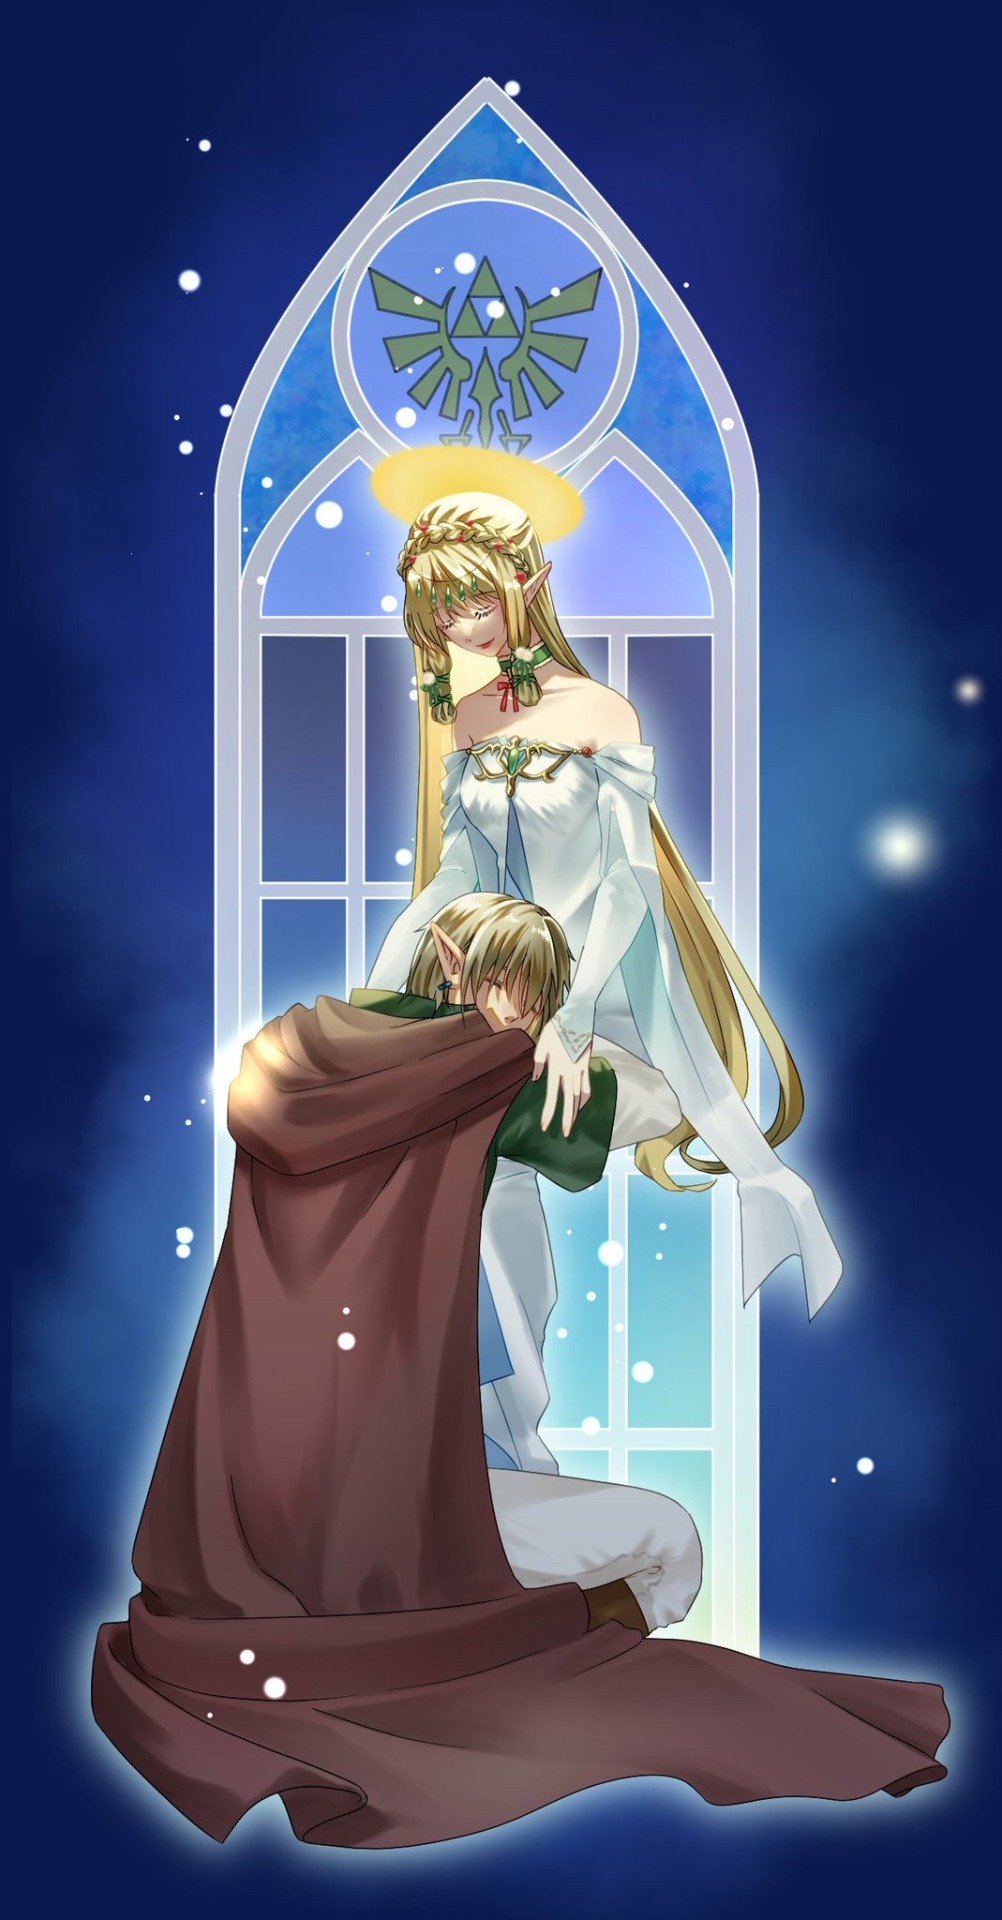 First resting his head on Hylia's lap in front of a stained glass window. Hylia has a halo of gold.